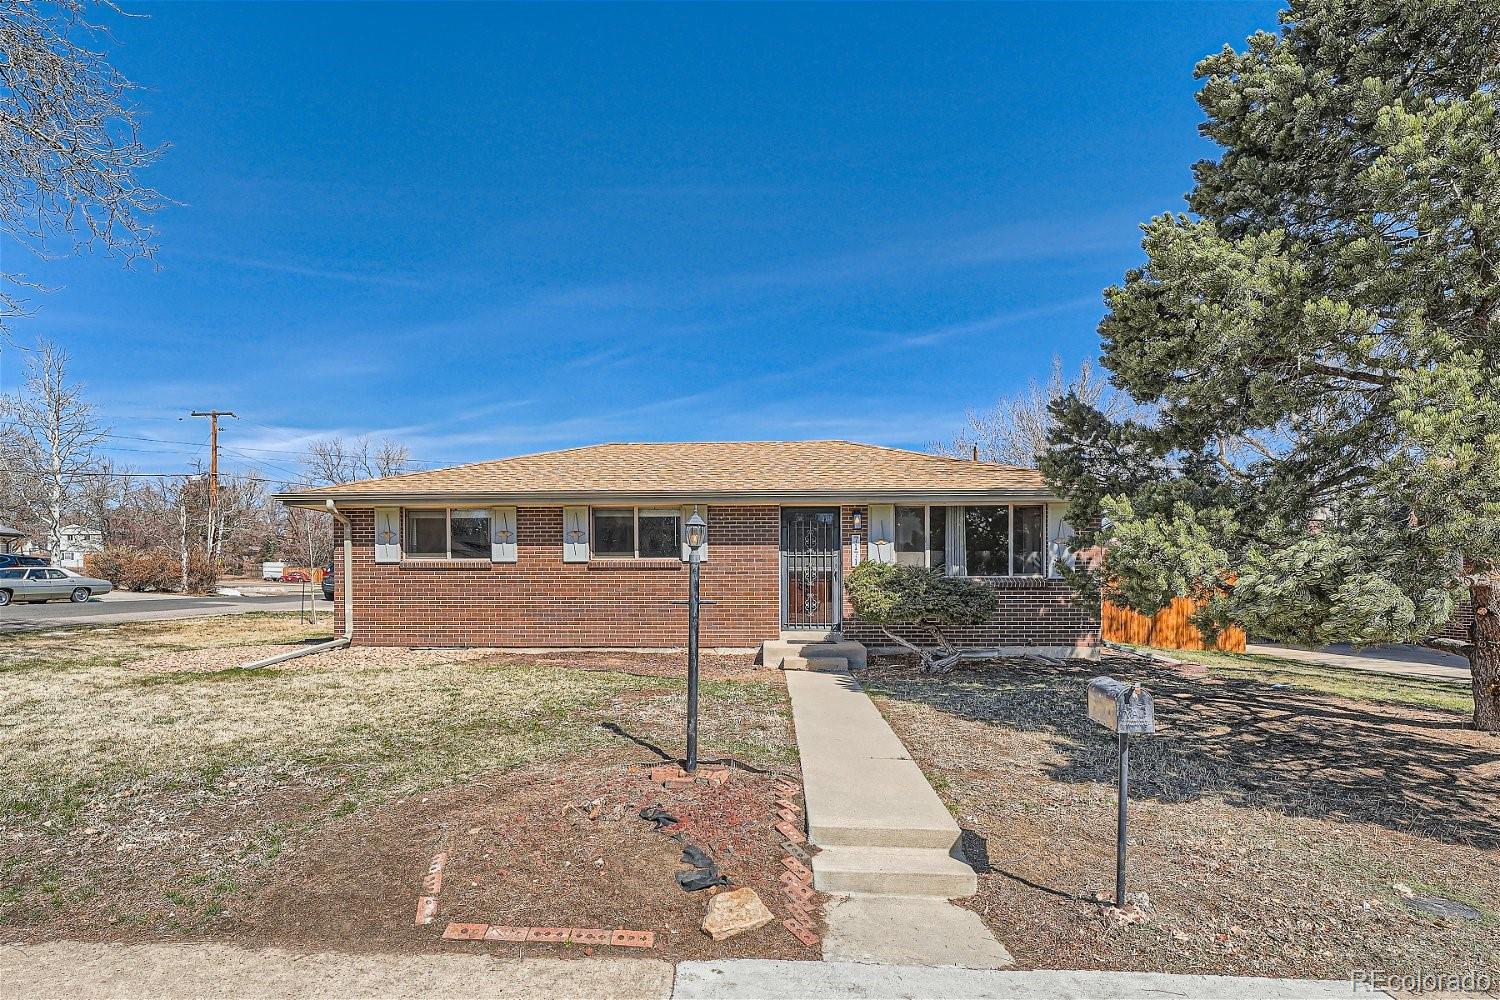 7171 w 75th place, arvada sold home. Closed on 2024-06-03 for $600,000.